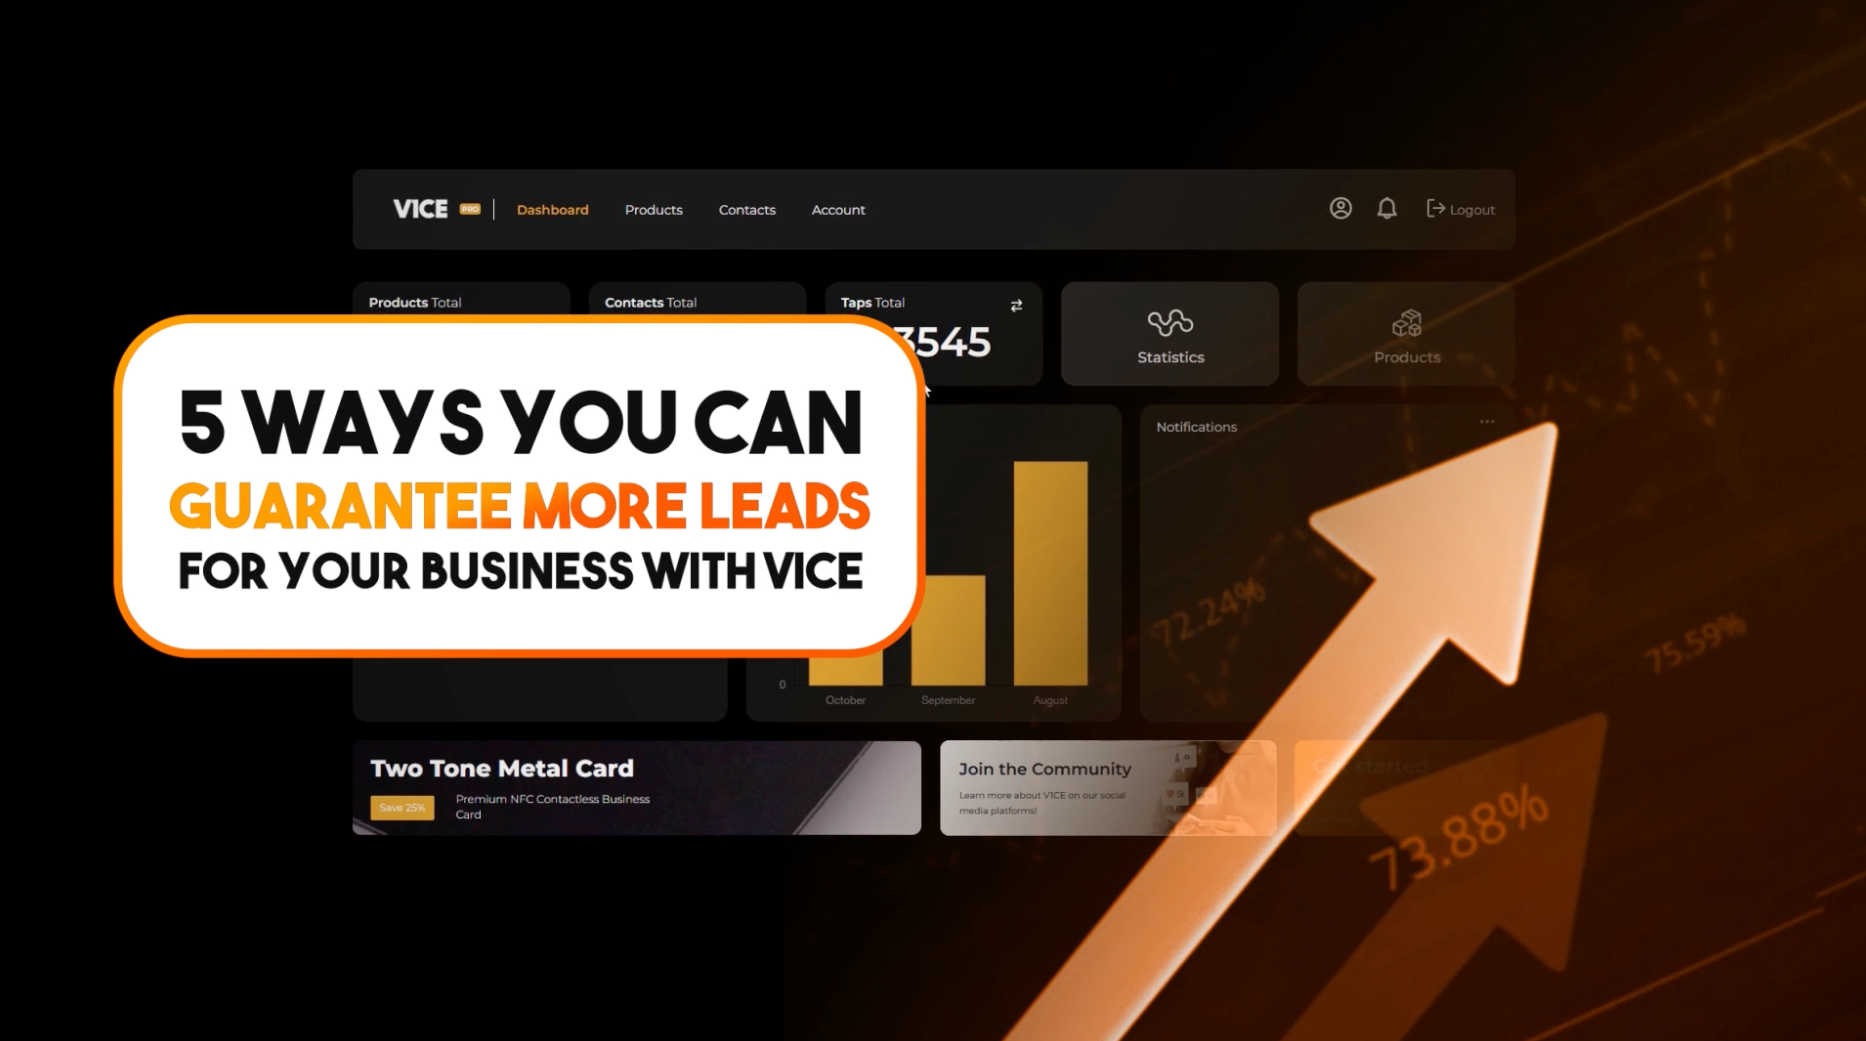 Maximize Your Business Growth: 5 Essential Steps with V1CE to Skyrocket Your Lead Generation"